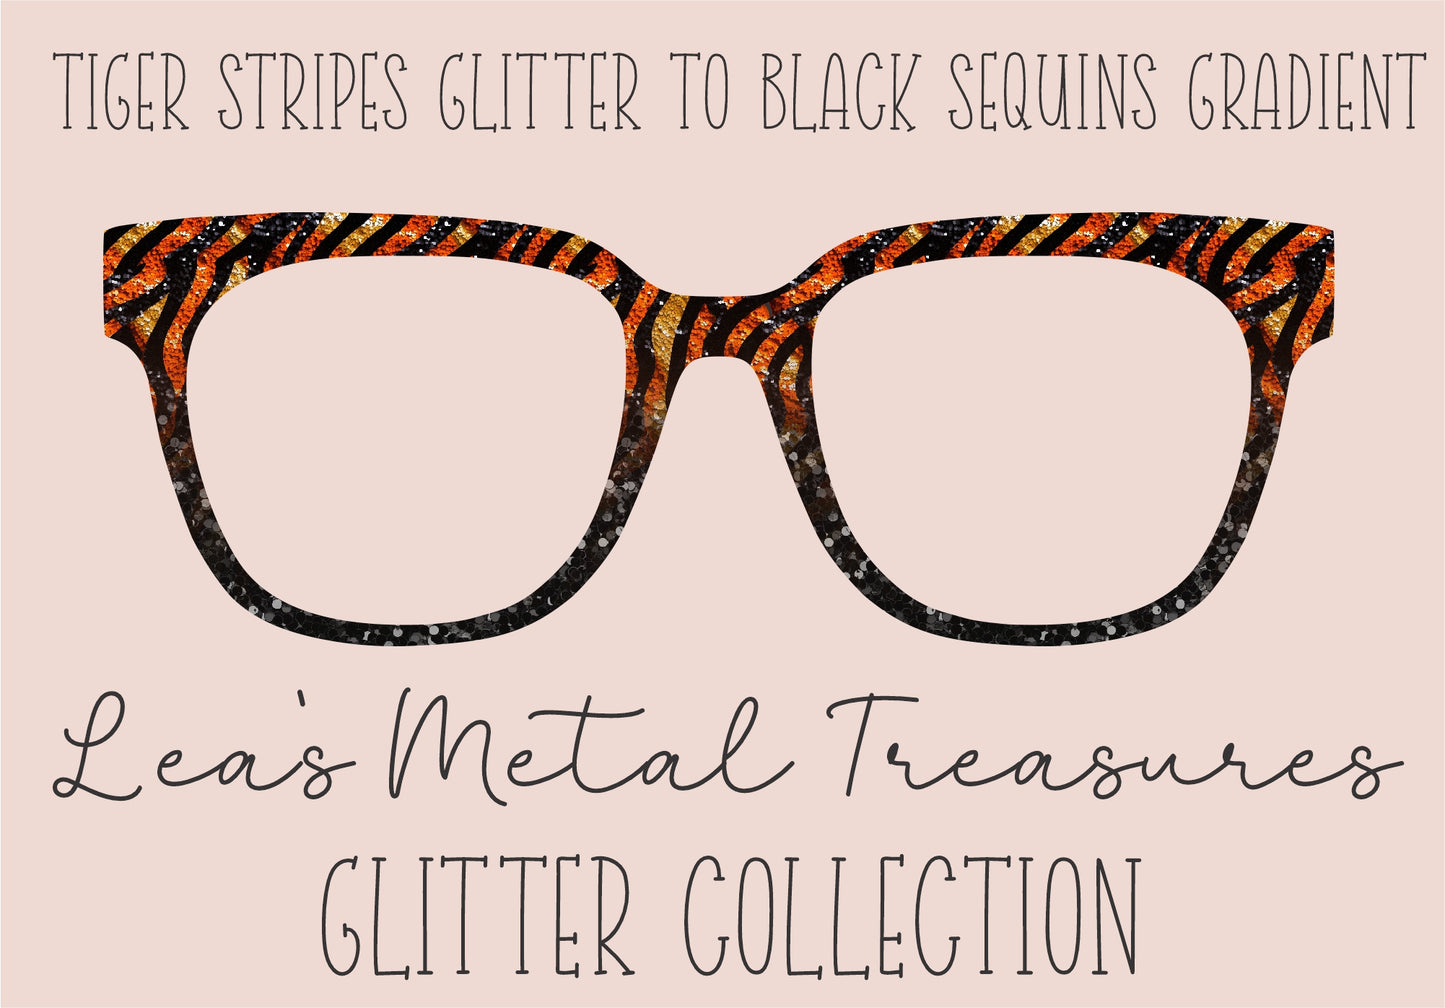 Tiger Stripes Glitter to Black Sequins Gradient Eyewear Frame Toppers COMES WITH MAGNETS